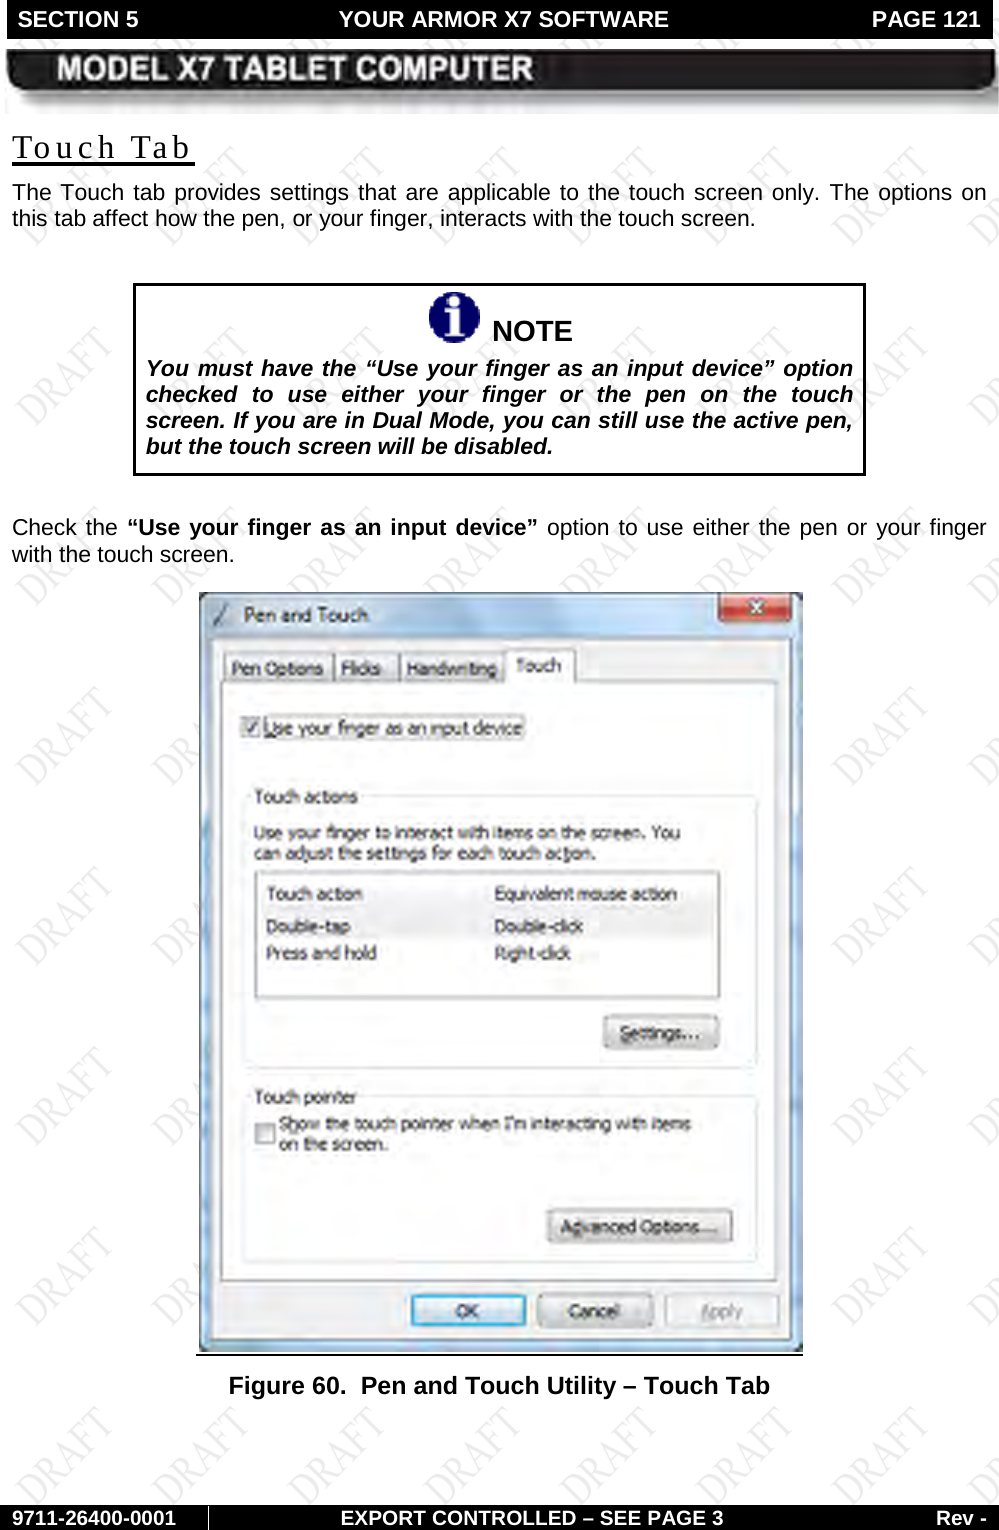 SECTION 5 YOUR ARMOR X7 SOFTWARE  PAGE 121        9711-26400-0001 EXPORT CONTROLLED – SEE PAGE 3 Rev - The Touch tab provides settings that are applicable to the touch screen only. The options on this tab affect how the pen, or your finger, interacts with the touch screen.  Touch Tab    NOTE You must have the “Use your finger as an input device” option checked to use either your finger or the pen on the touch screen. If you are in Dual Mode, you can still use the active pen, but the touch screen will be disabled.  Check the “Use your finger as an input device” option to use either the pen or your finger with the touch screen. Figure 60.  Pen and Touch Utility – Touch Tab  